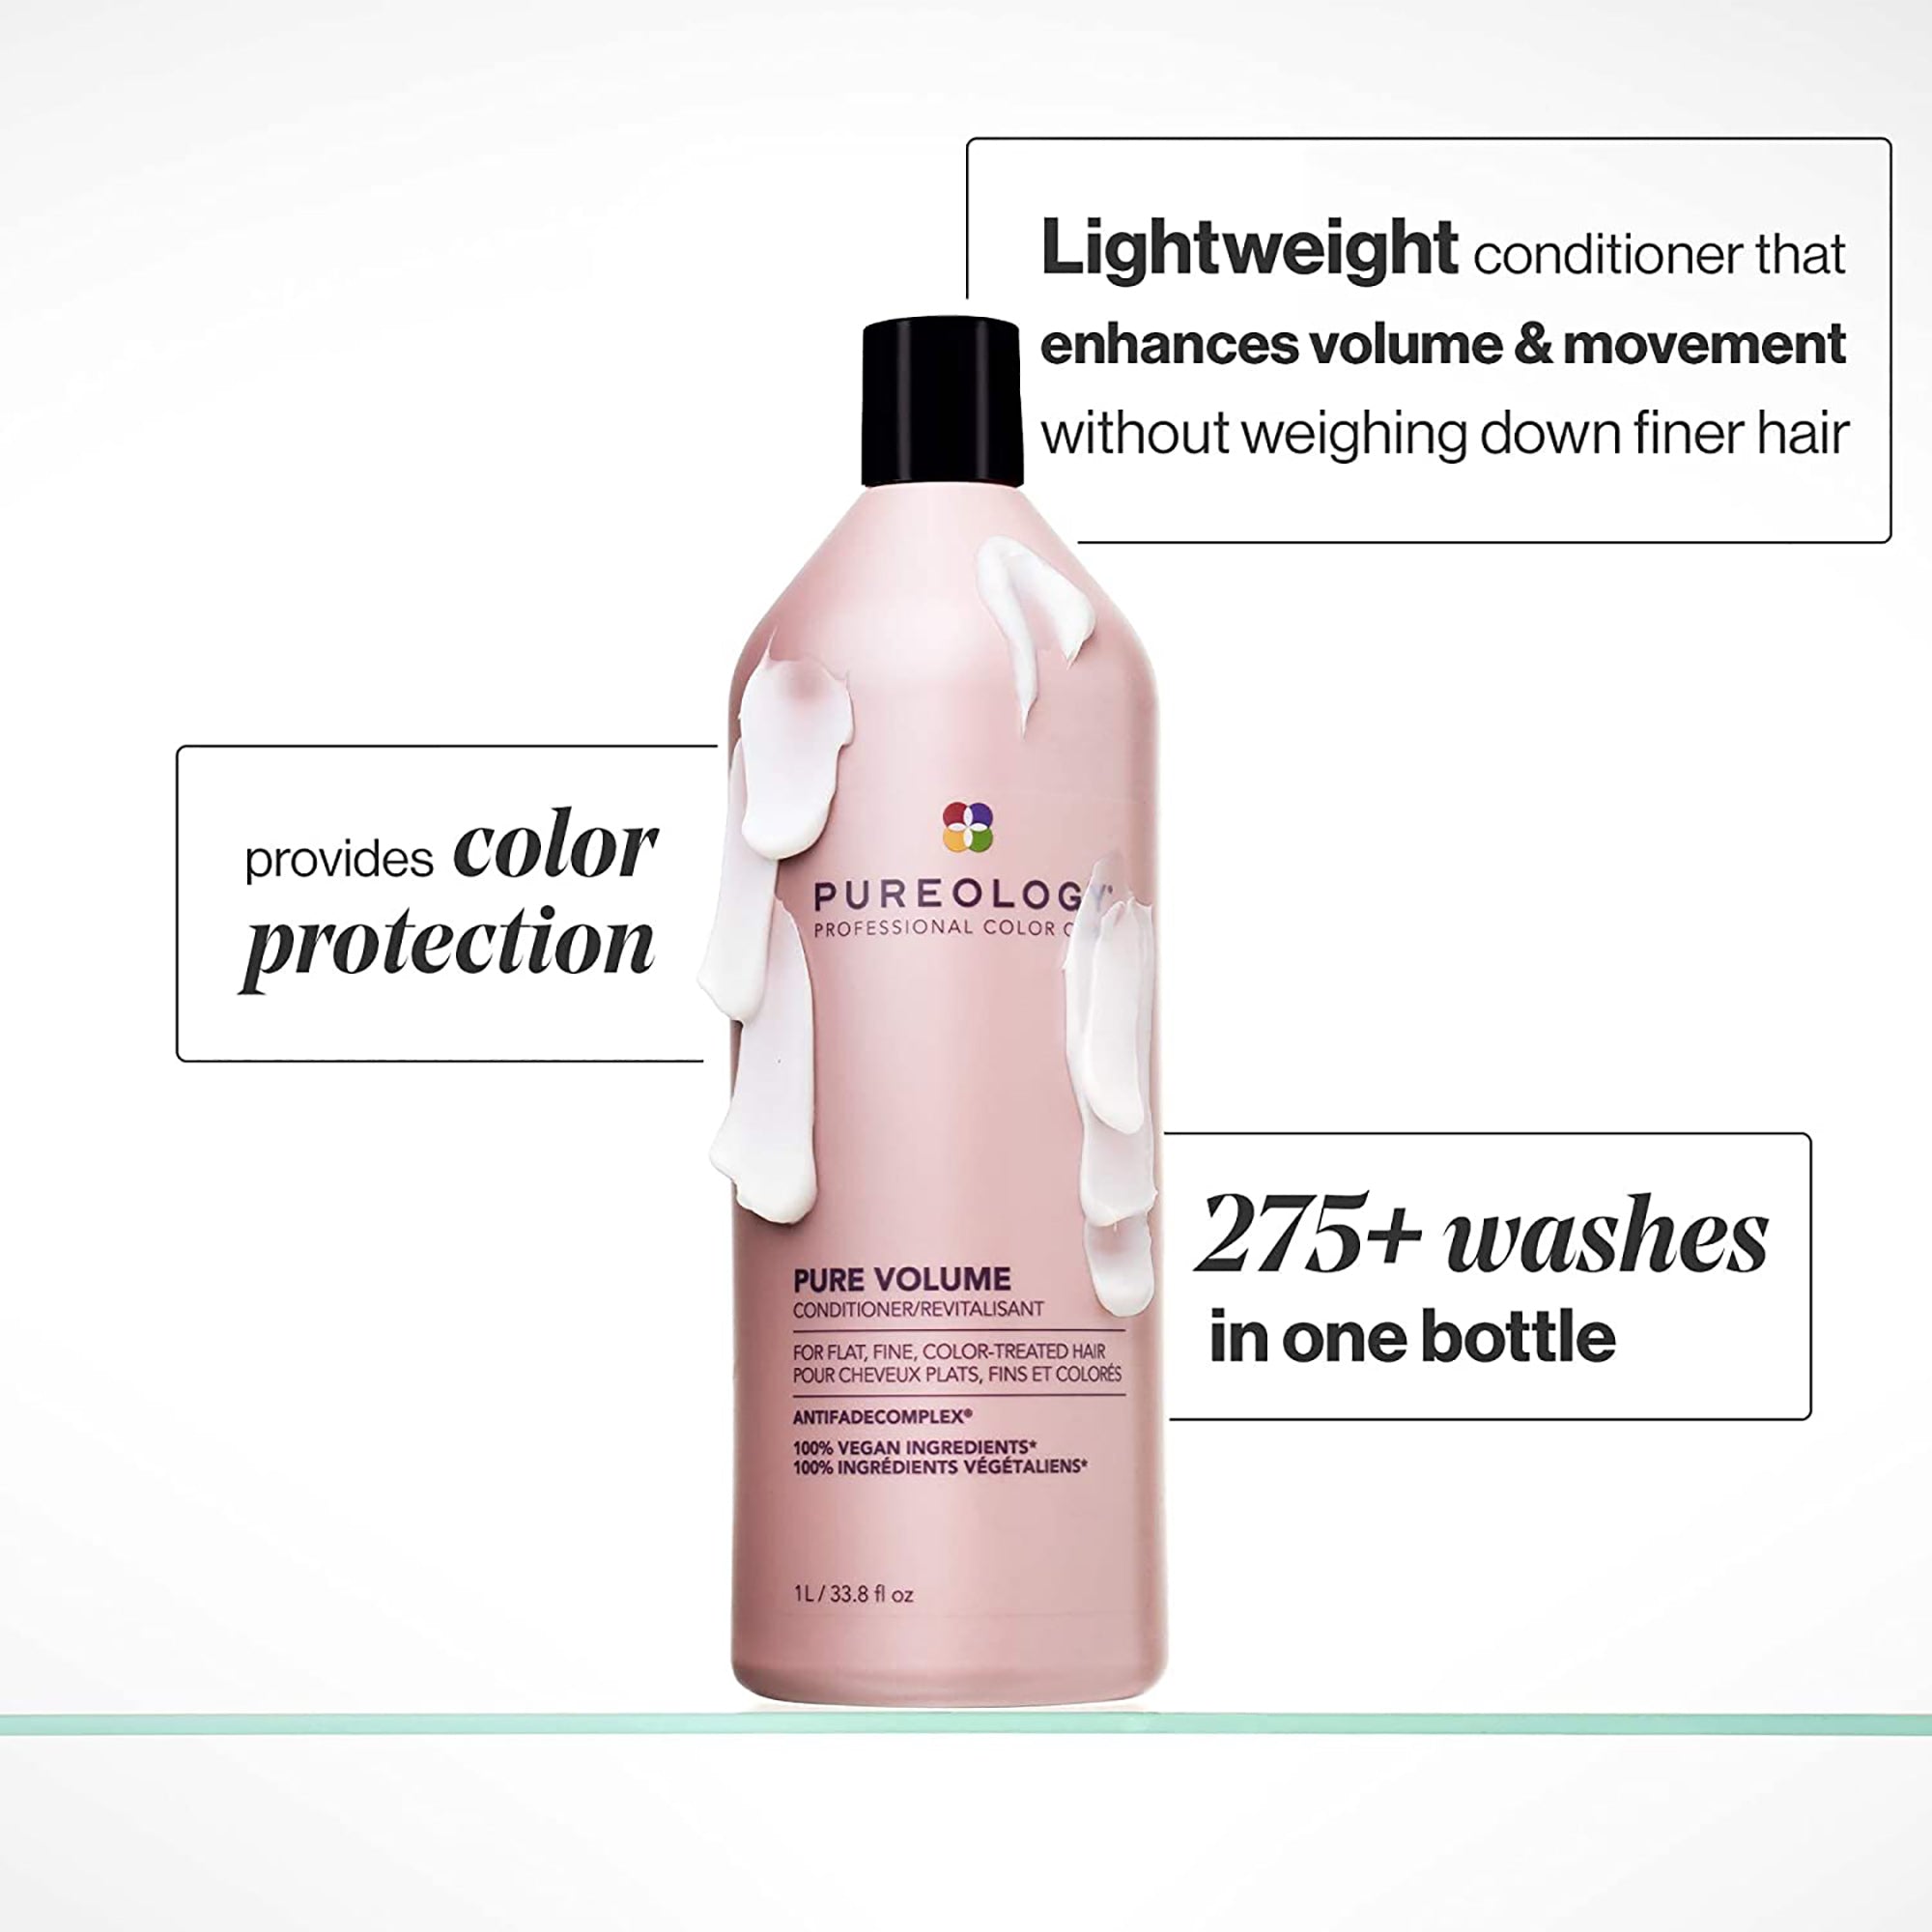 Pureology Pure Volume Conditioner / LTR